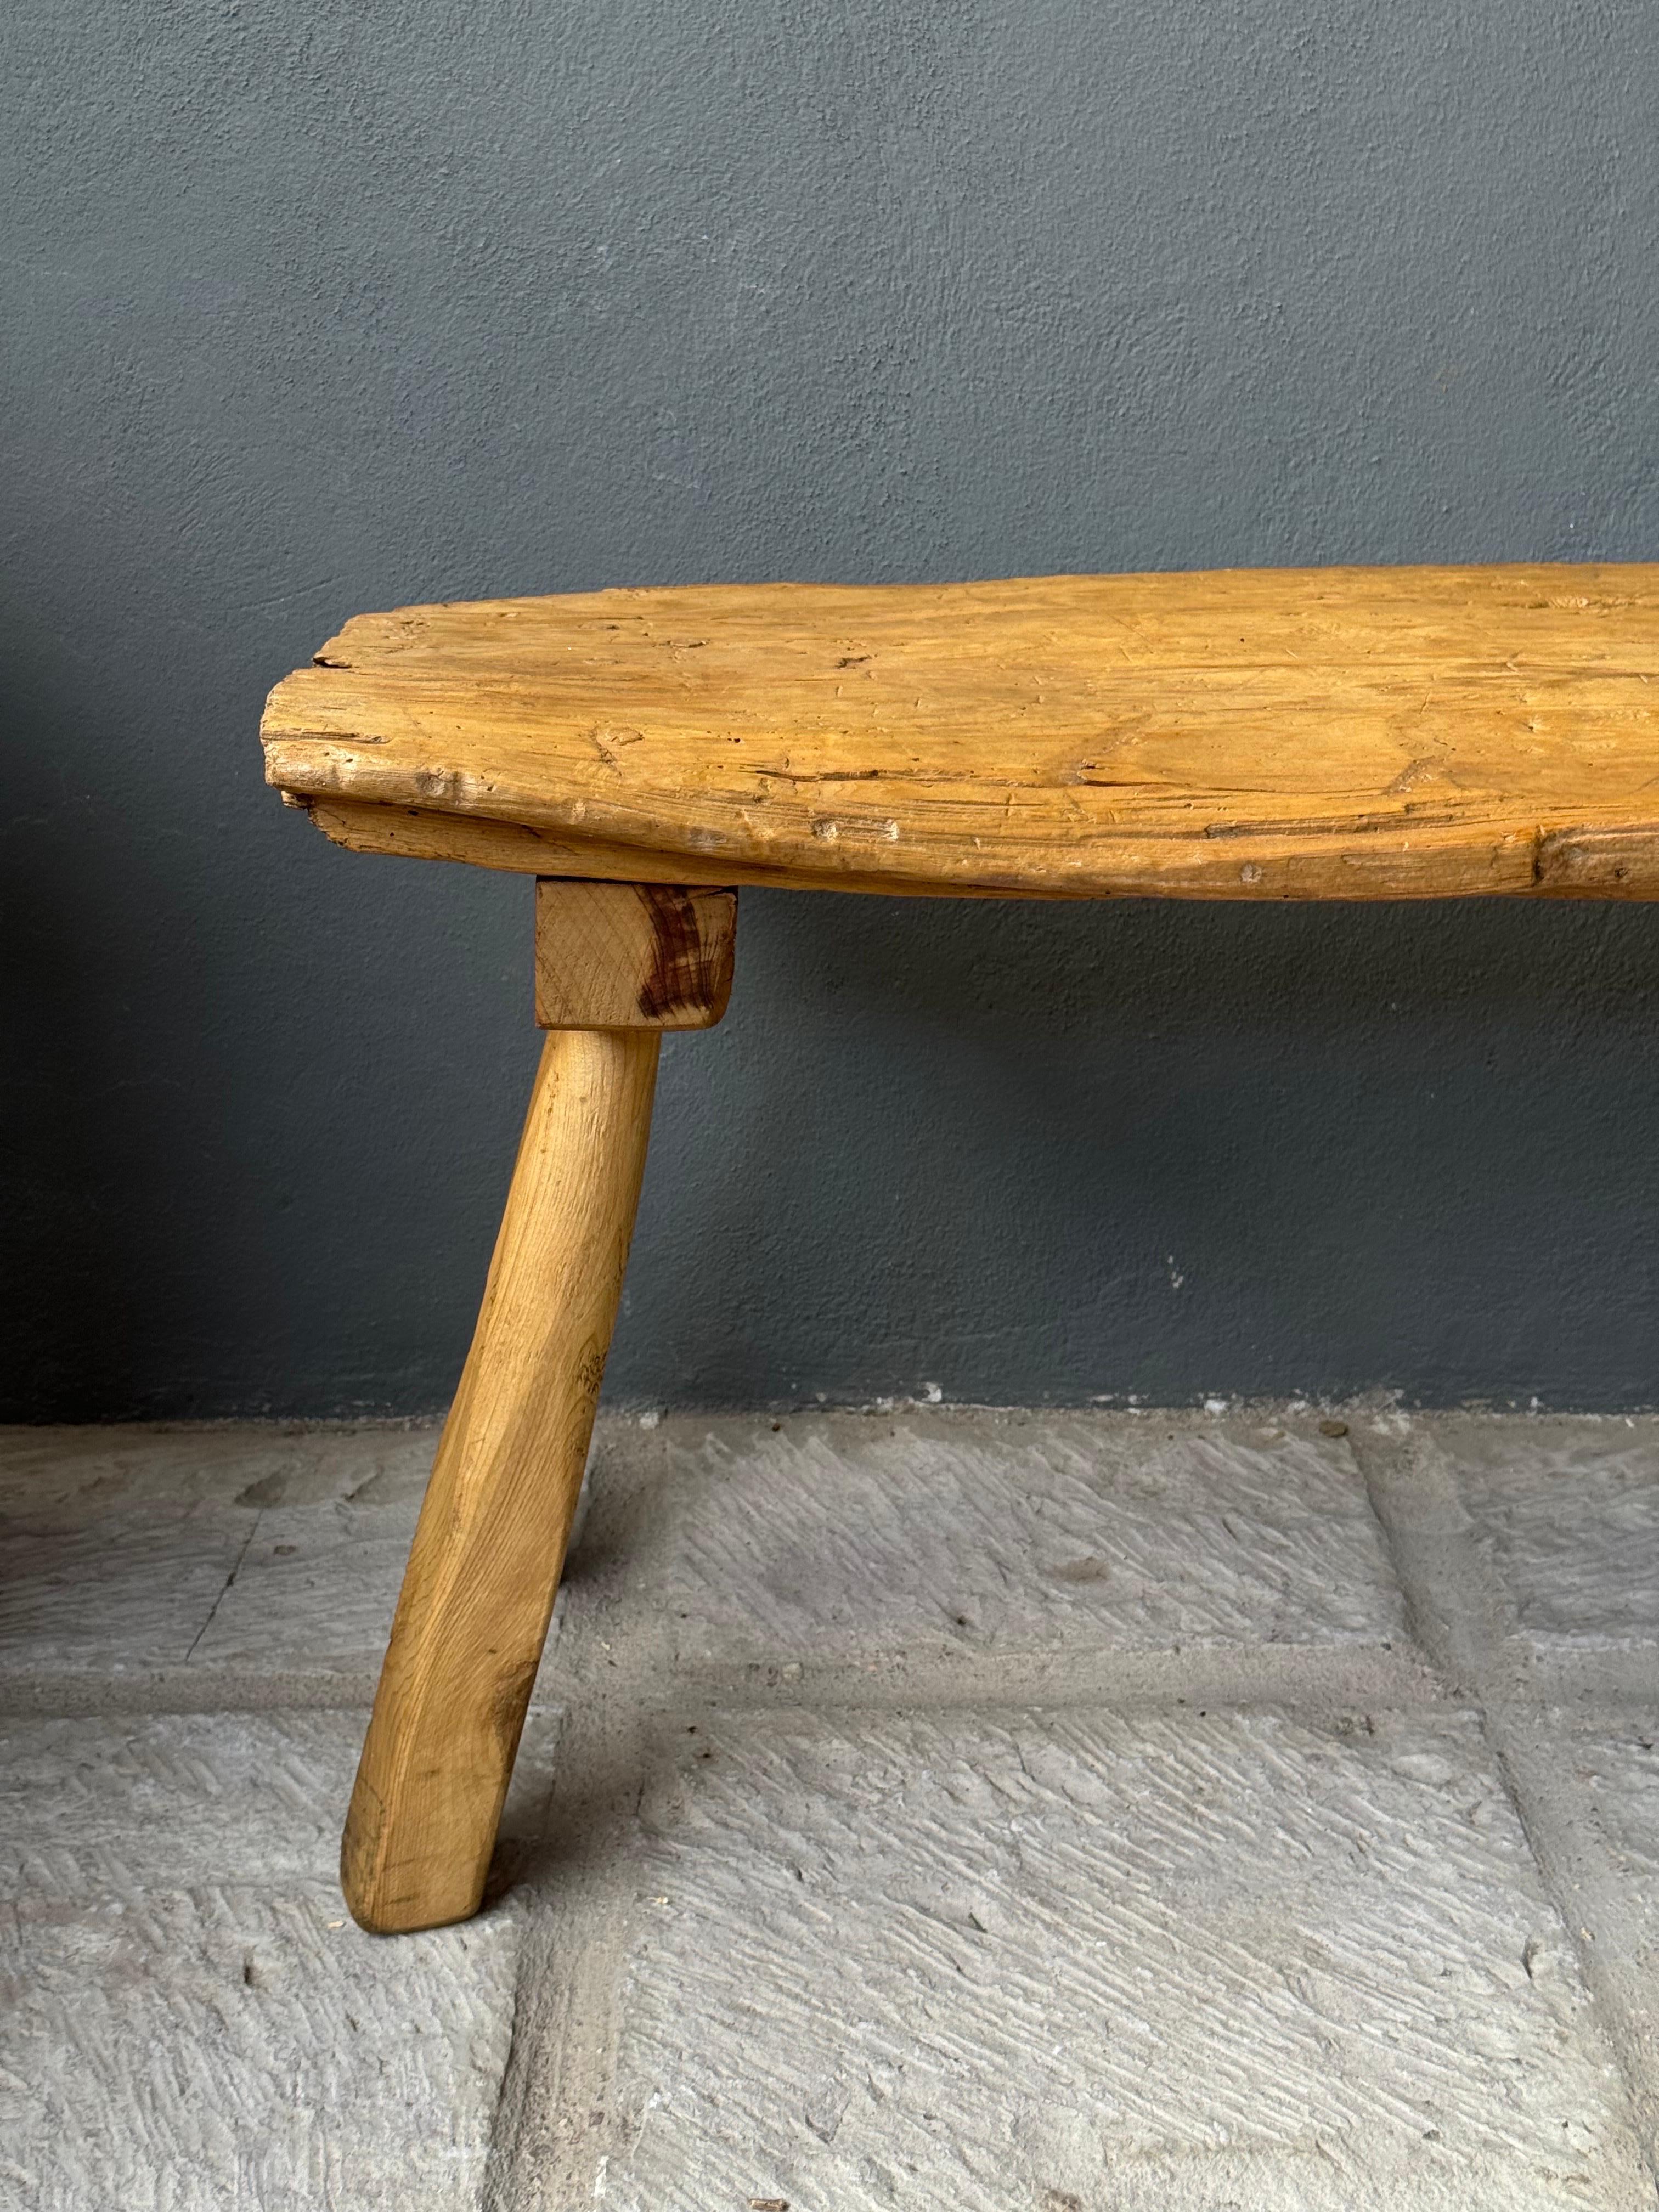 Sabino bench from Puebla, Mexico. Newly fabricated using a 19th century plank door.